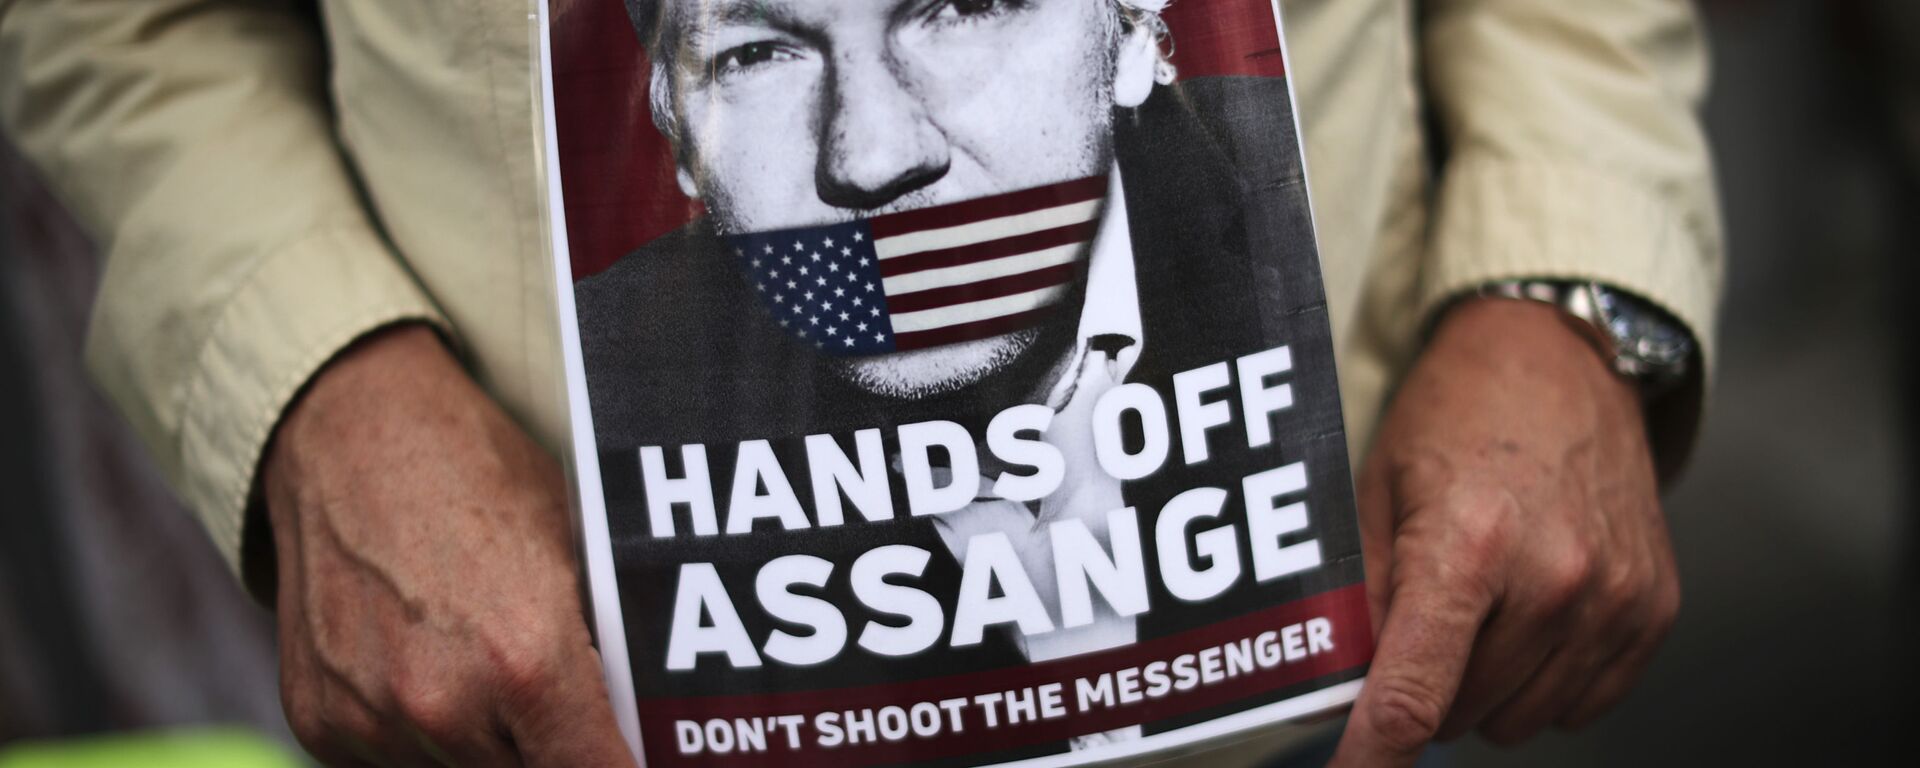 A man holds a photograph of WikiLeaks founder Julian Assange during a protest demanding the freedom of Assange in front of the UK embassy in Brussels, Monday, Sept. 7, 2020 - Sputnik International, 1920, 19.03.2021